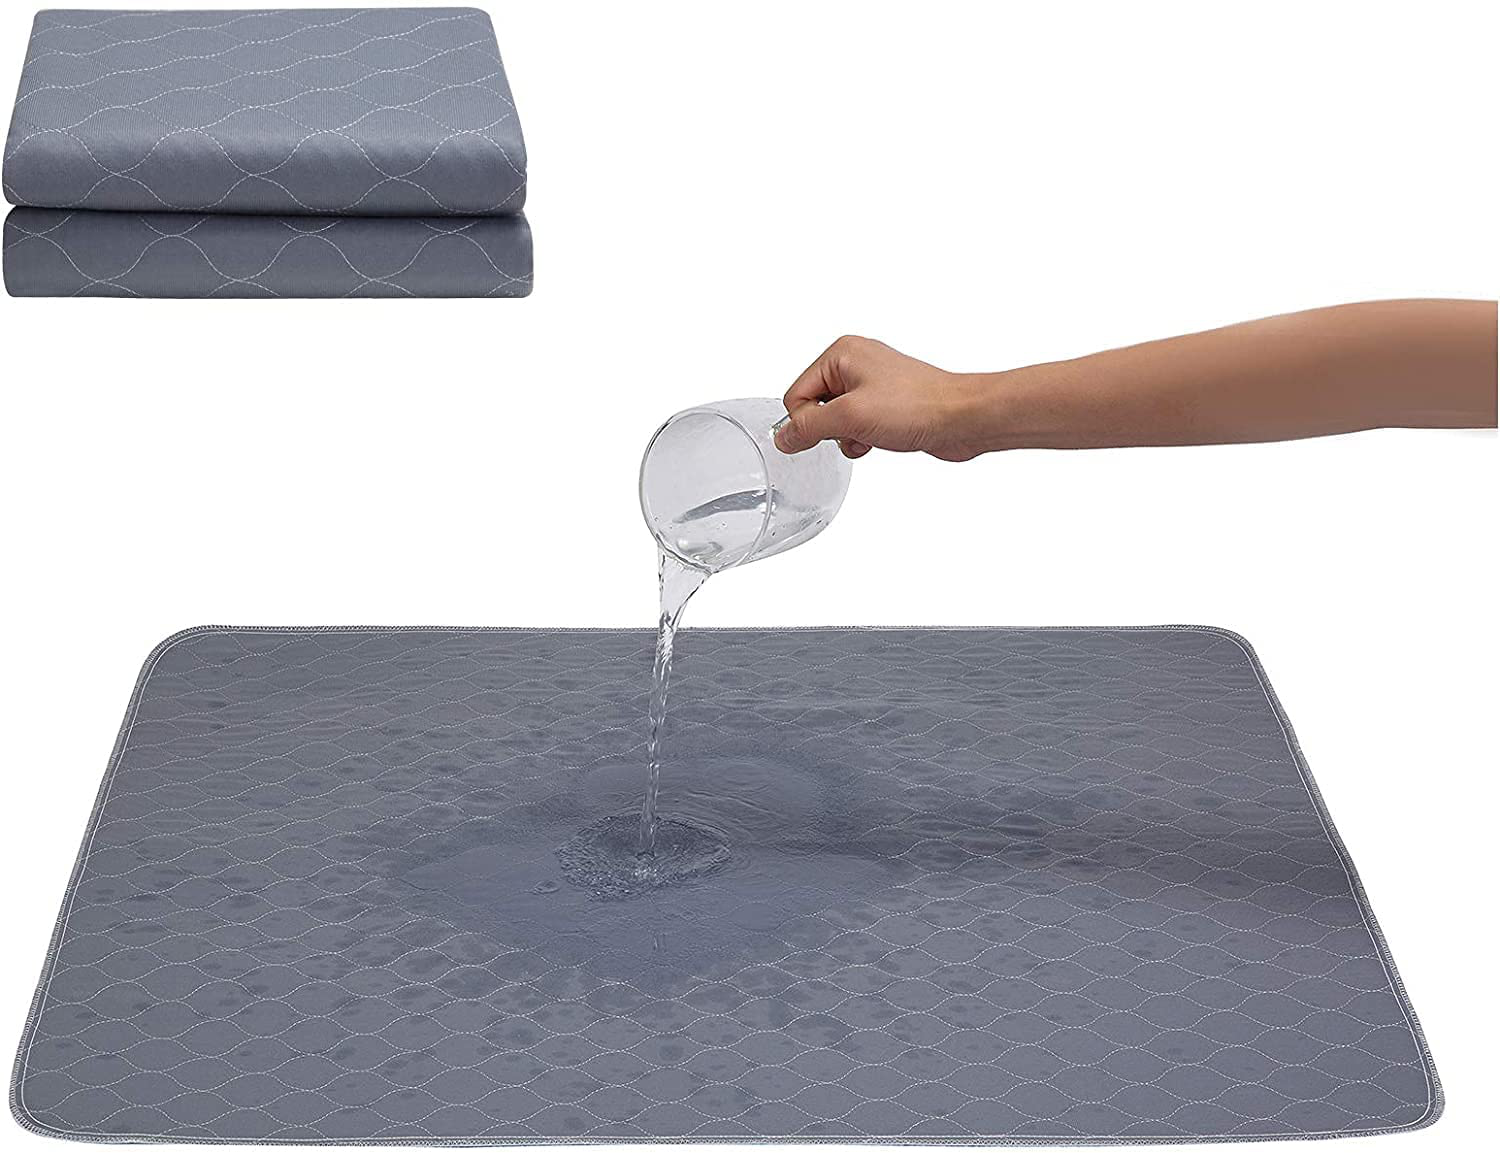 Jdpet Washable Dog Pee Pads+Free Grooming Gloves - Reusable Whelping Pads,Waterproof Dog Mat Non-Slip Puppy Potty Training Pads for Dogs, Cats, Bunny Animals & Pet Supplies > Pet Supplies > Dog Supplies > Dog Diaper Pads & Liners JdPet Grey 36"X36"(2Pack) 